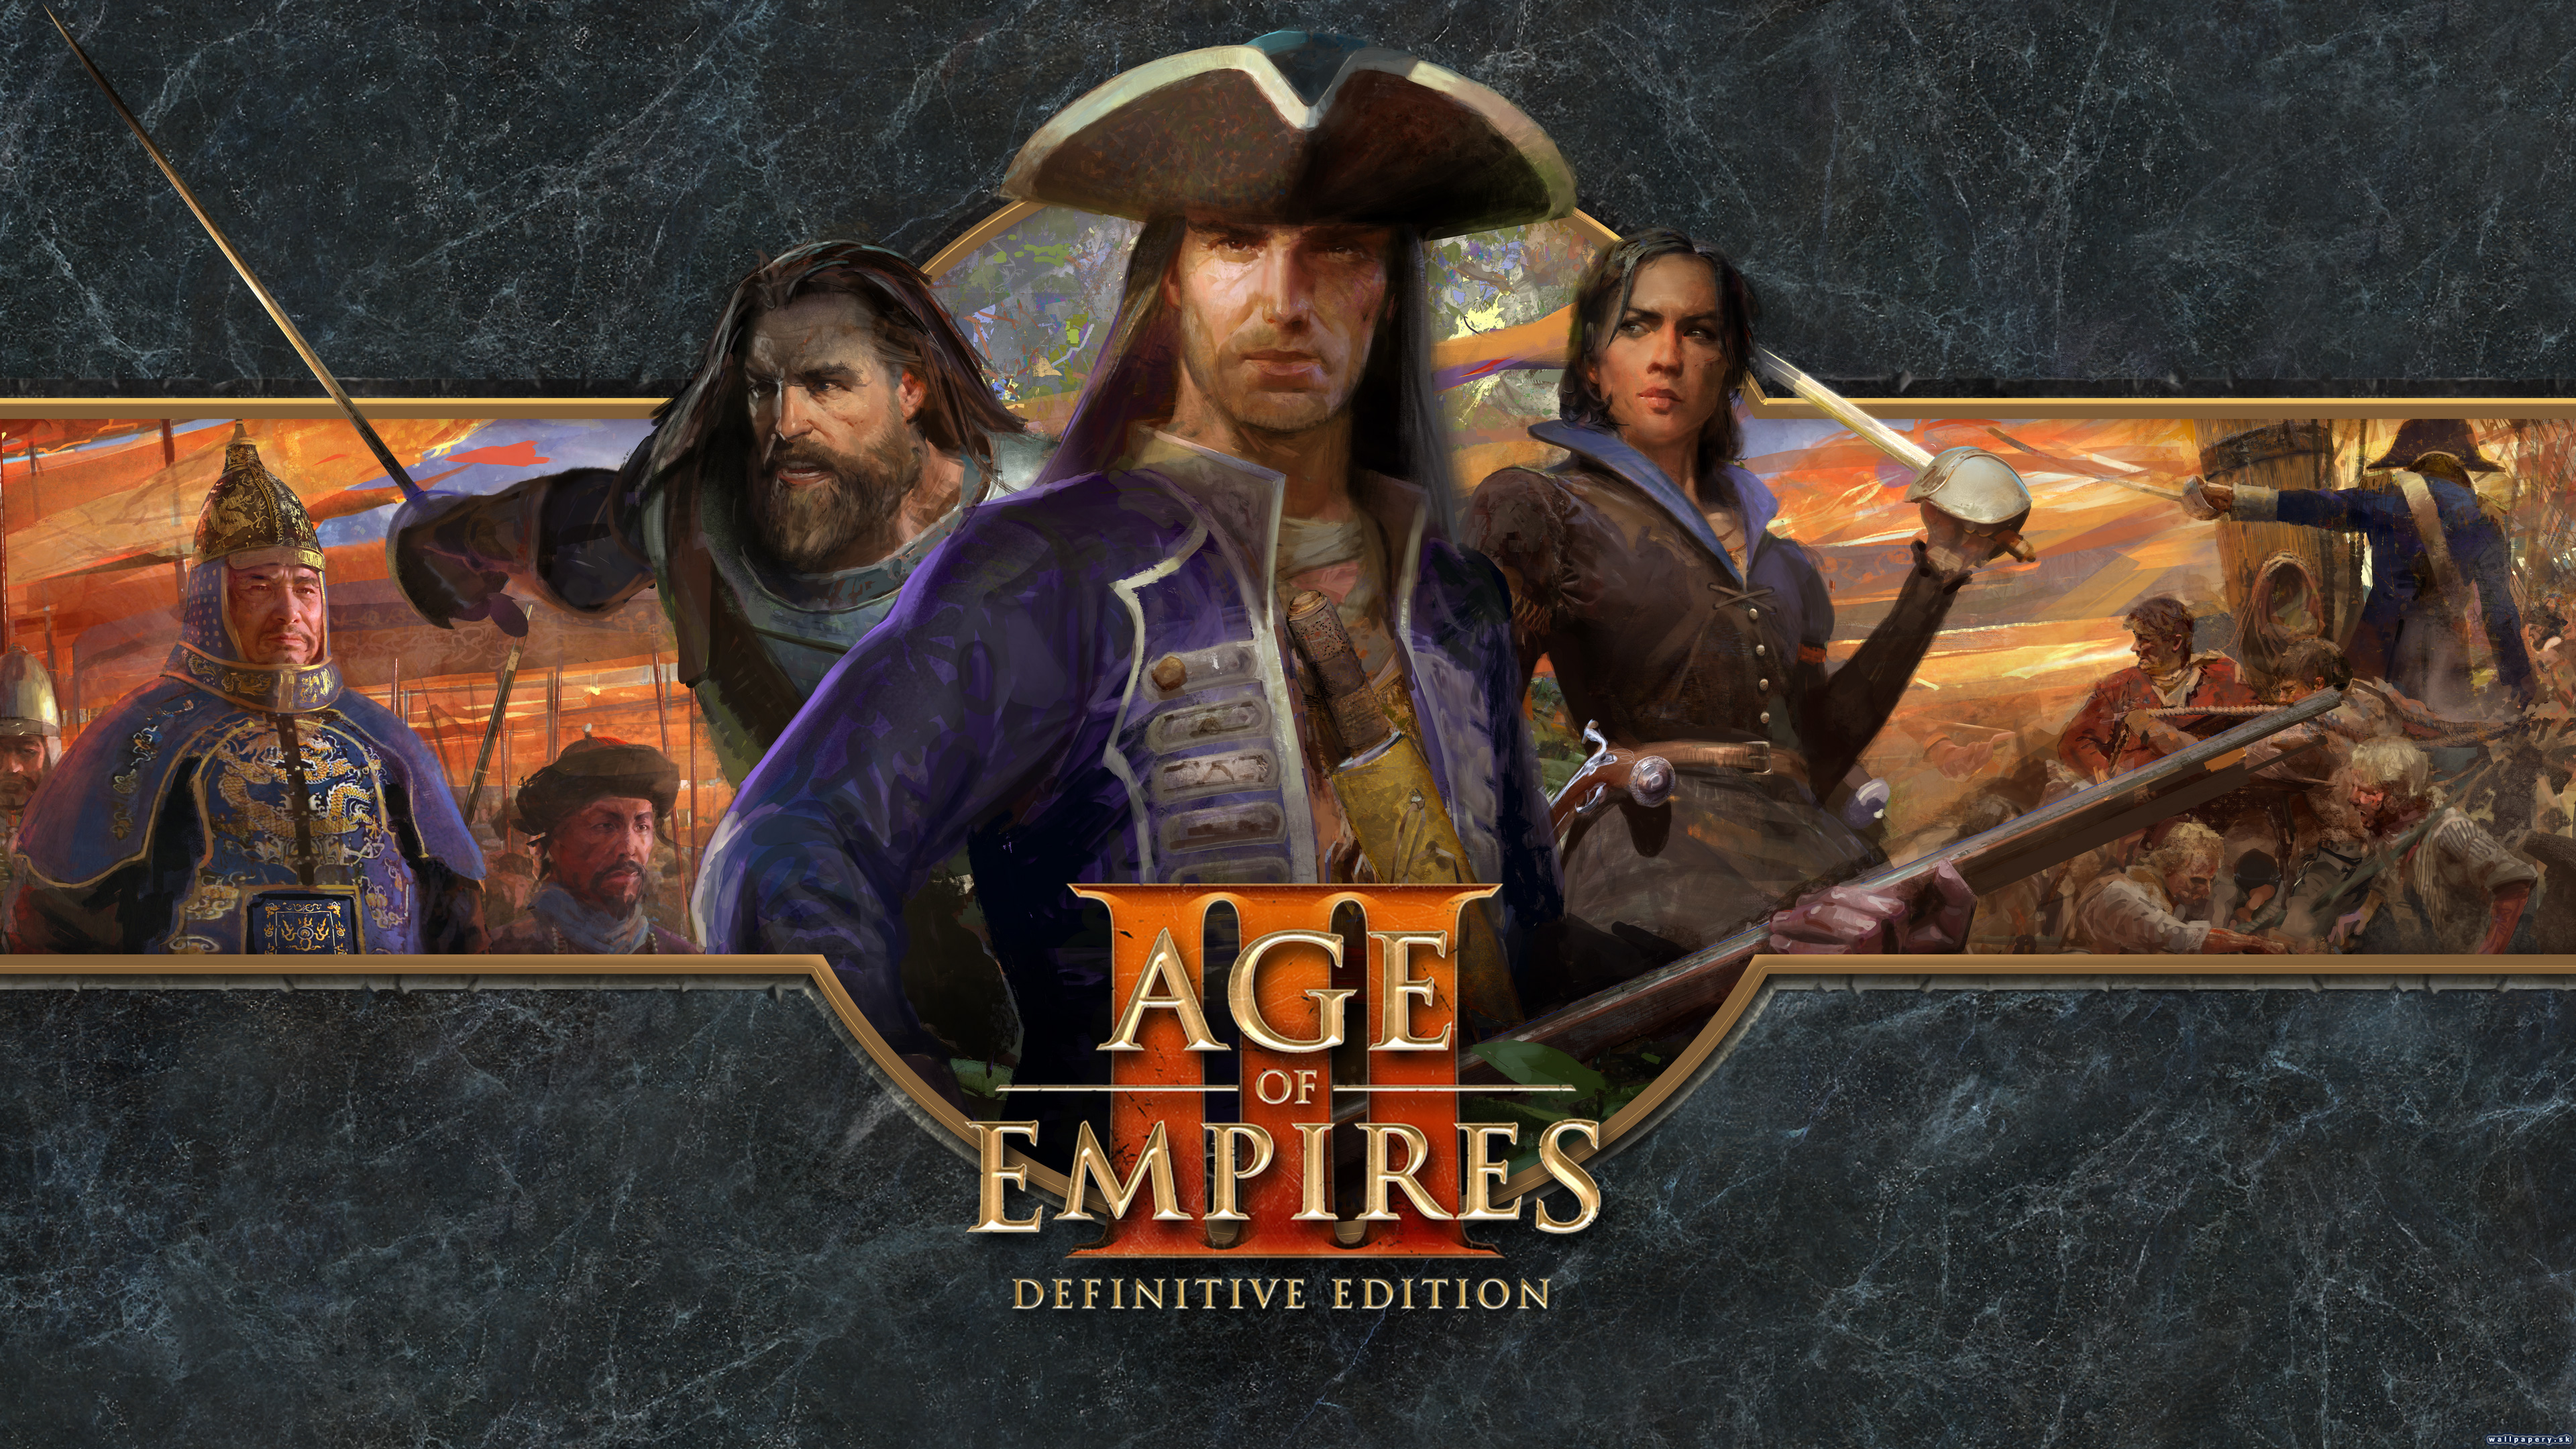 Age of Empires III: Definitive Edition - wallpaper 1